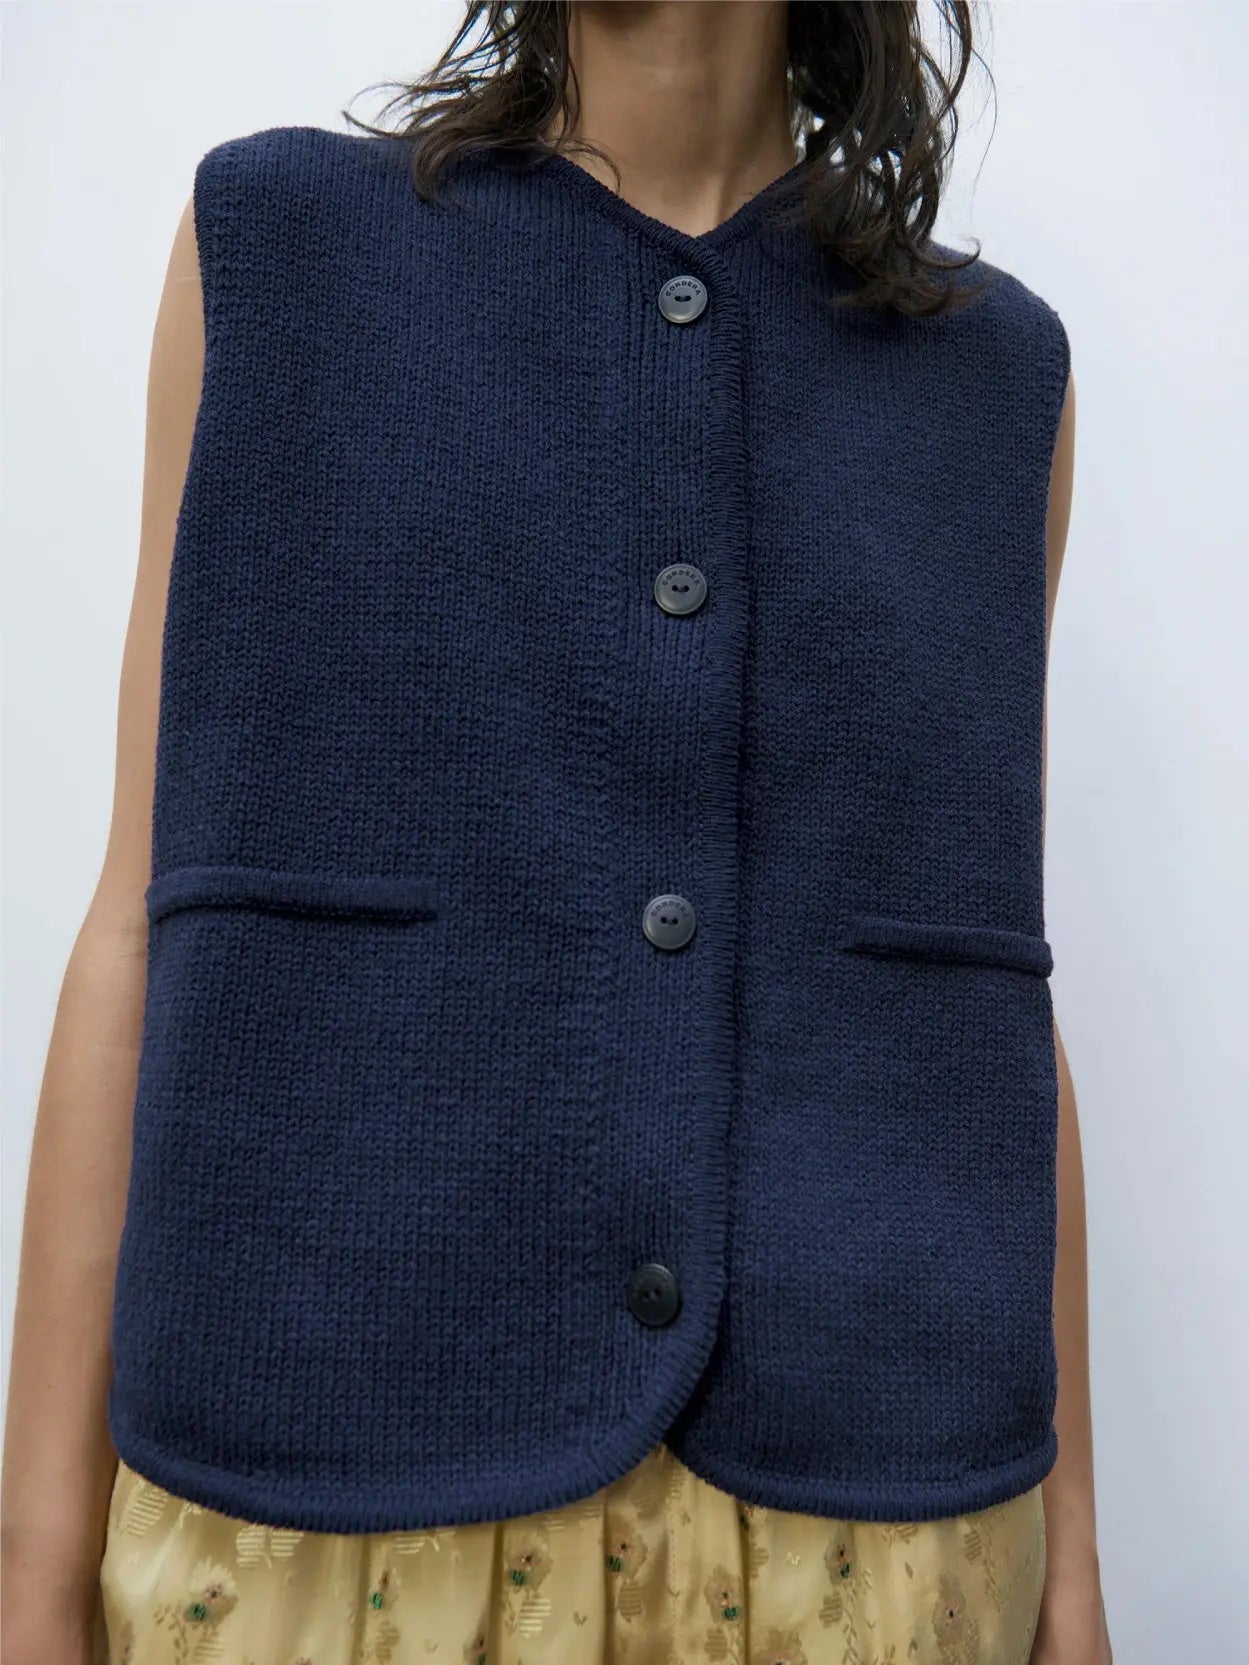 A dark blue, sleeveless vest with a simple design is available at Bassalstore in Barcelona. The vest features a button-down front with four buttons and two small pockets at the lower front. The fabric has a textured appearance. The back is not visible. The label inside the collar reads "Cotton Waistcoat Navy" by Cordera.